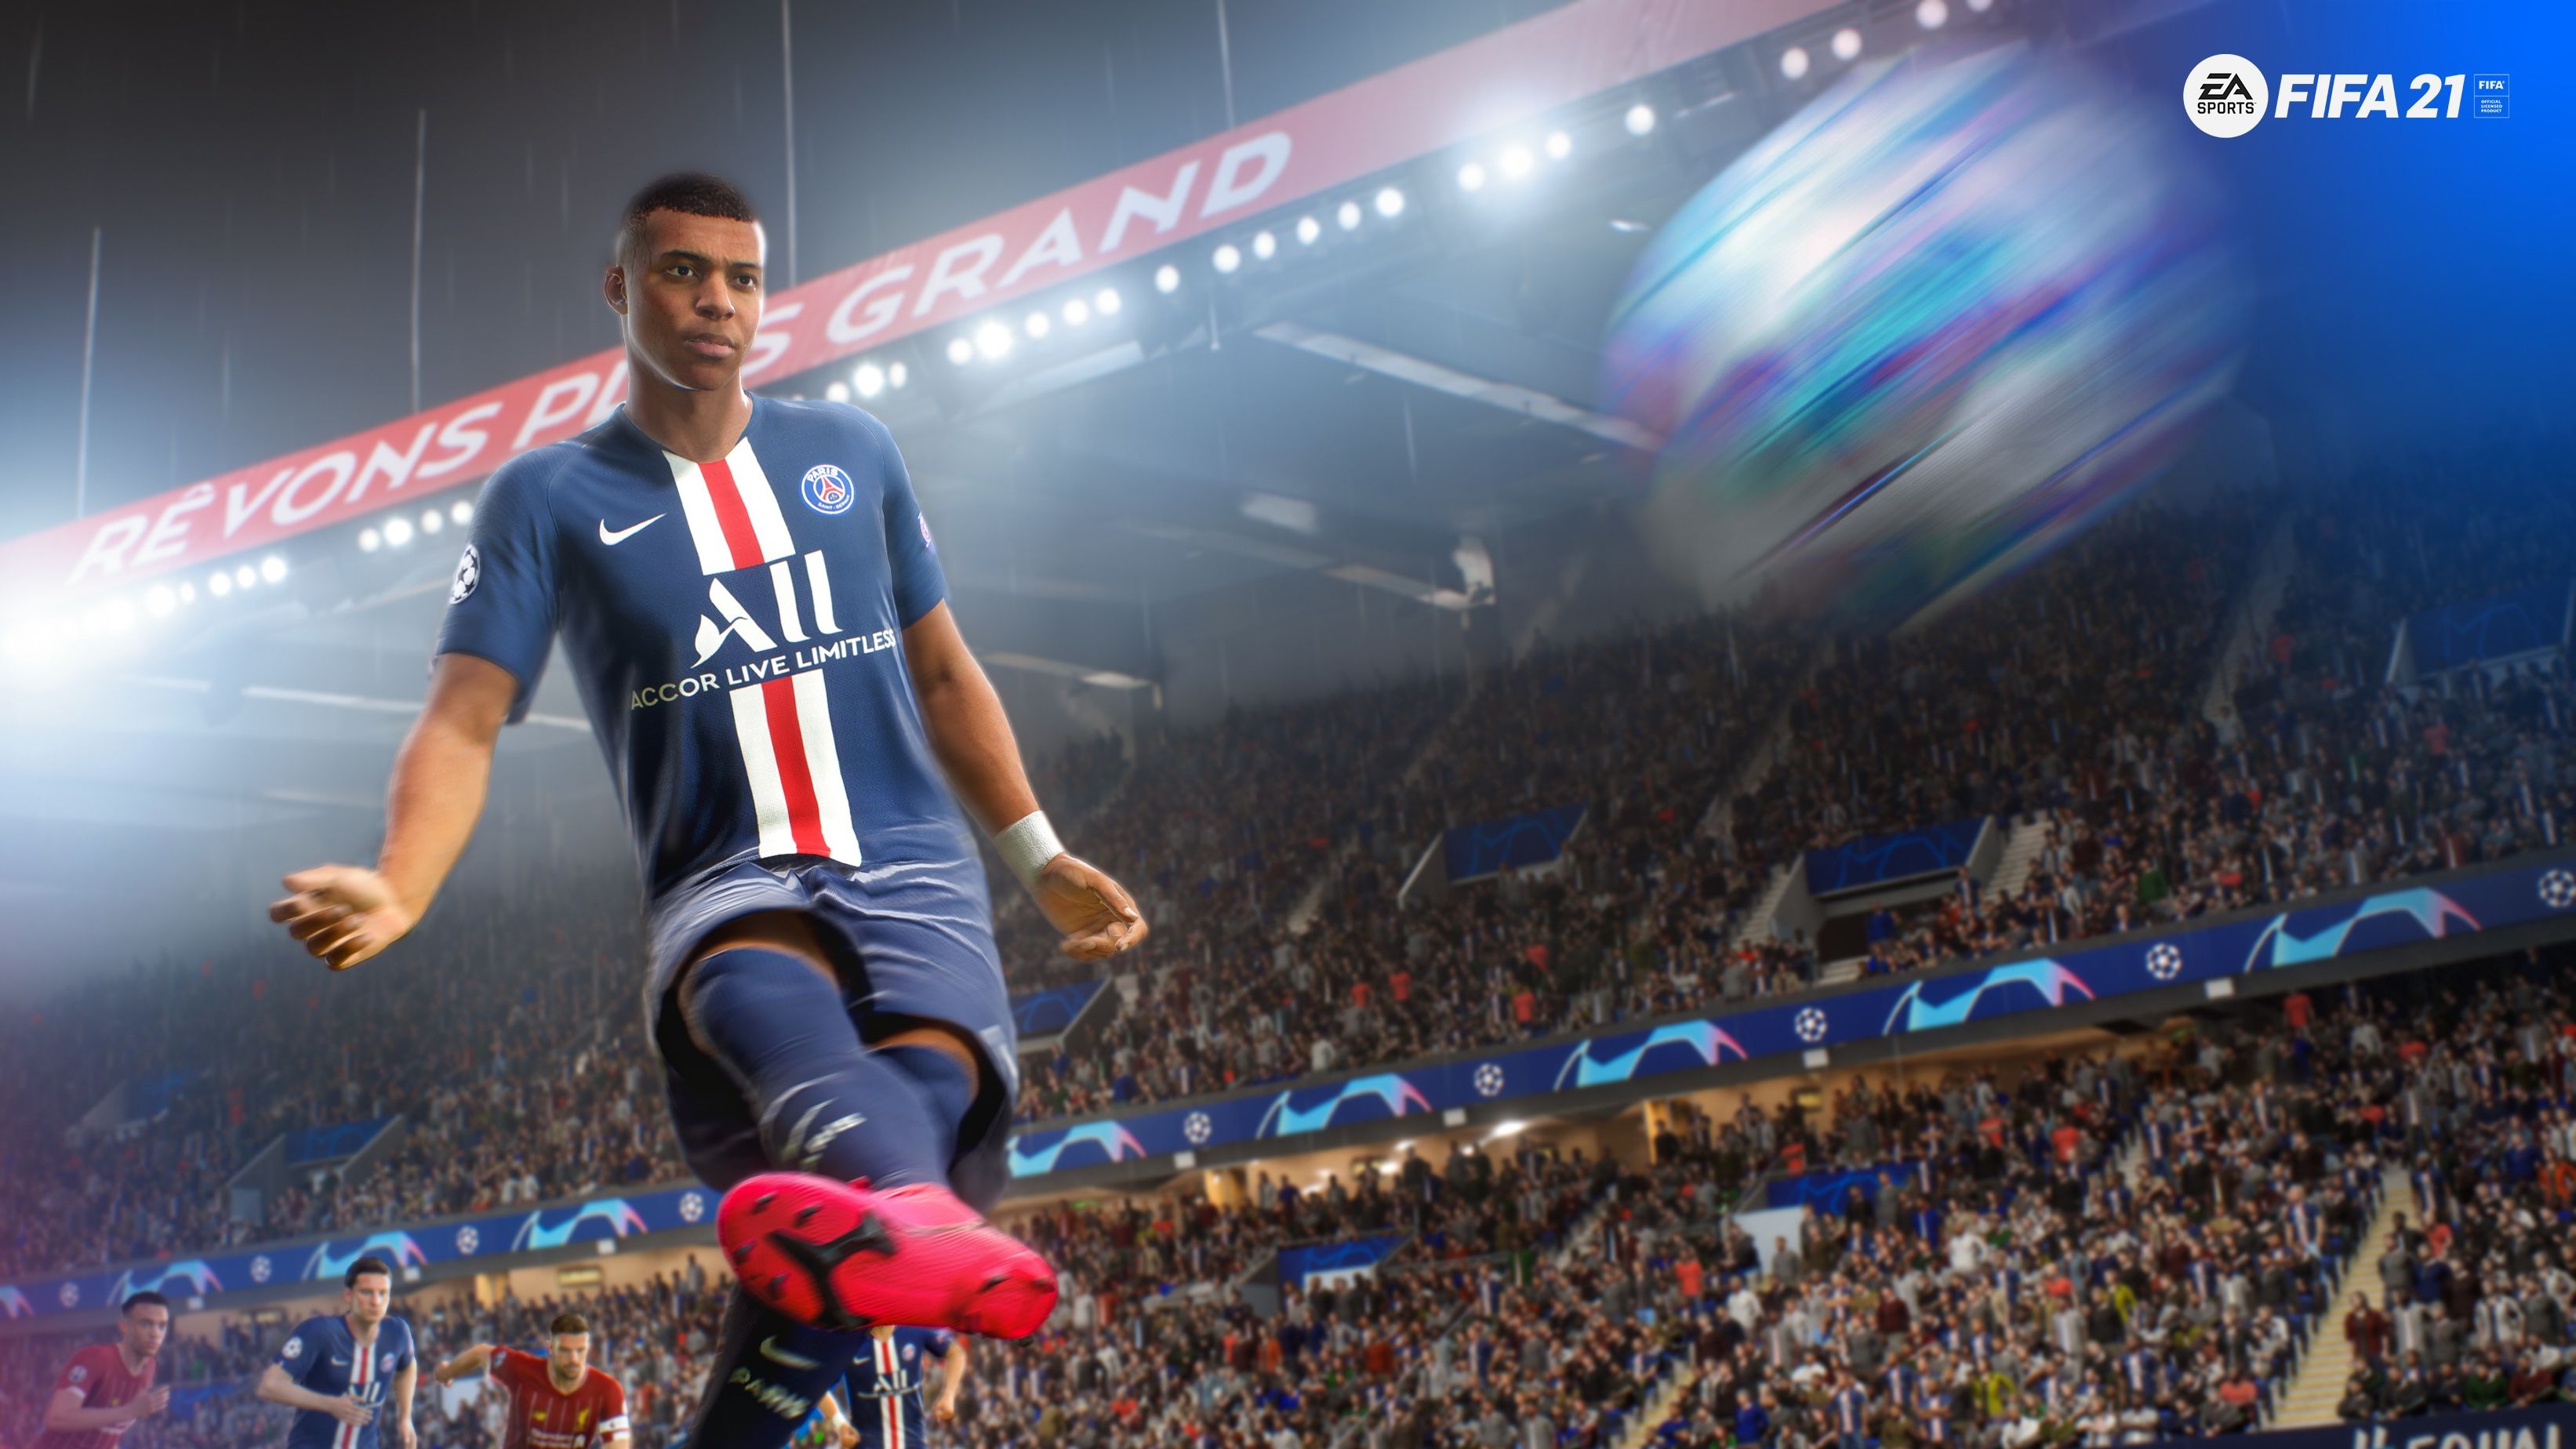 FIFA 21 Coming In October To Kick Off On Your Consoles!